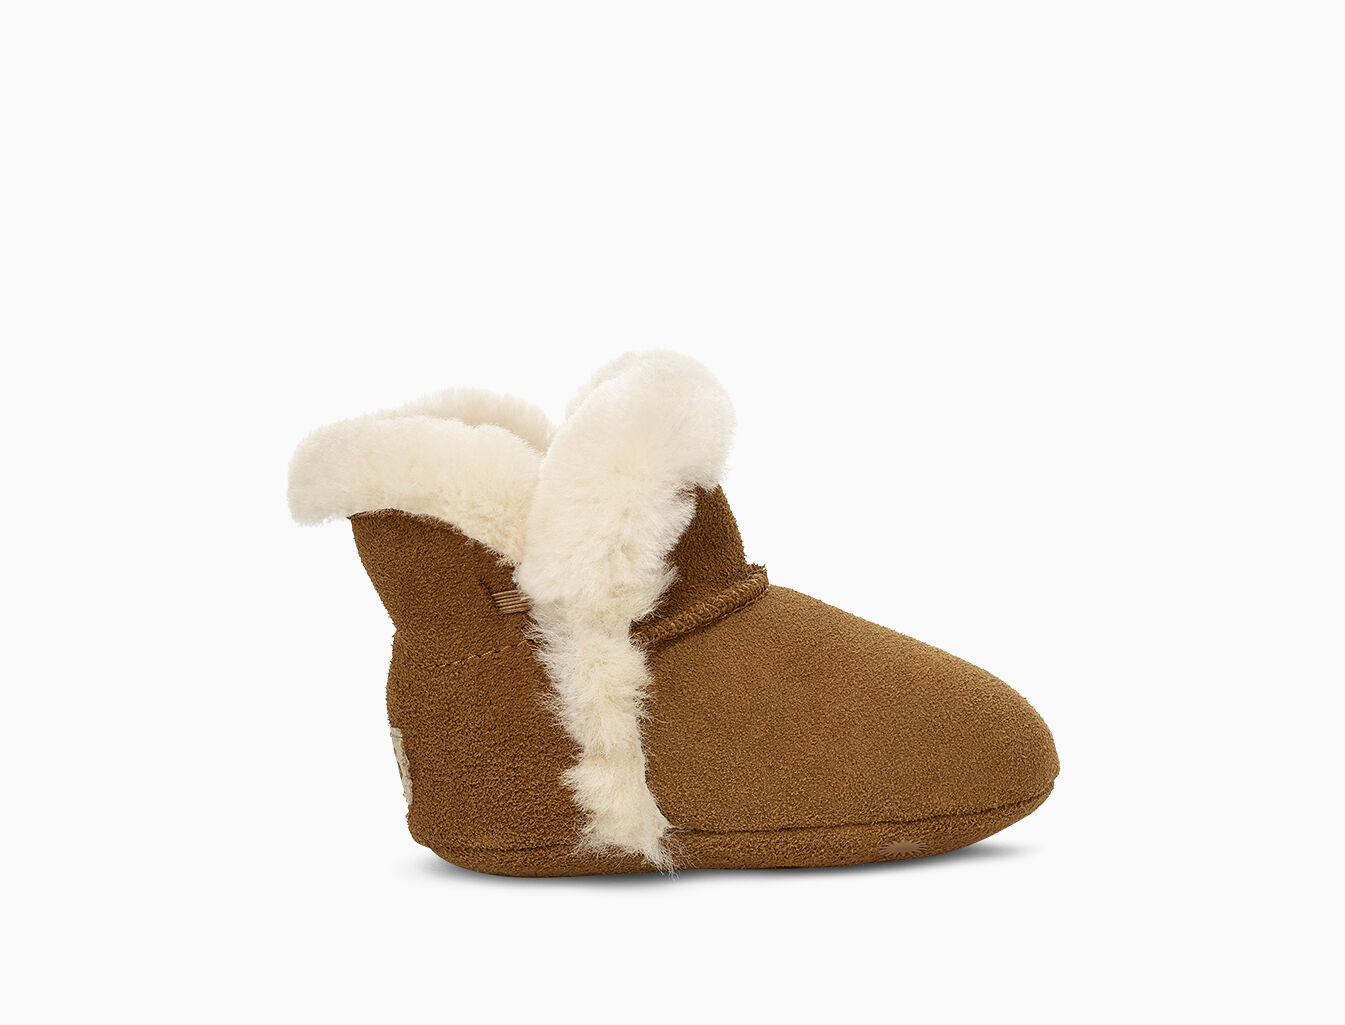 infant uggs size 6